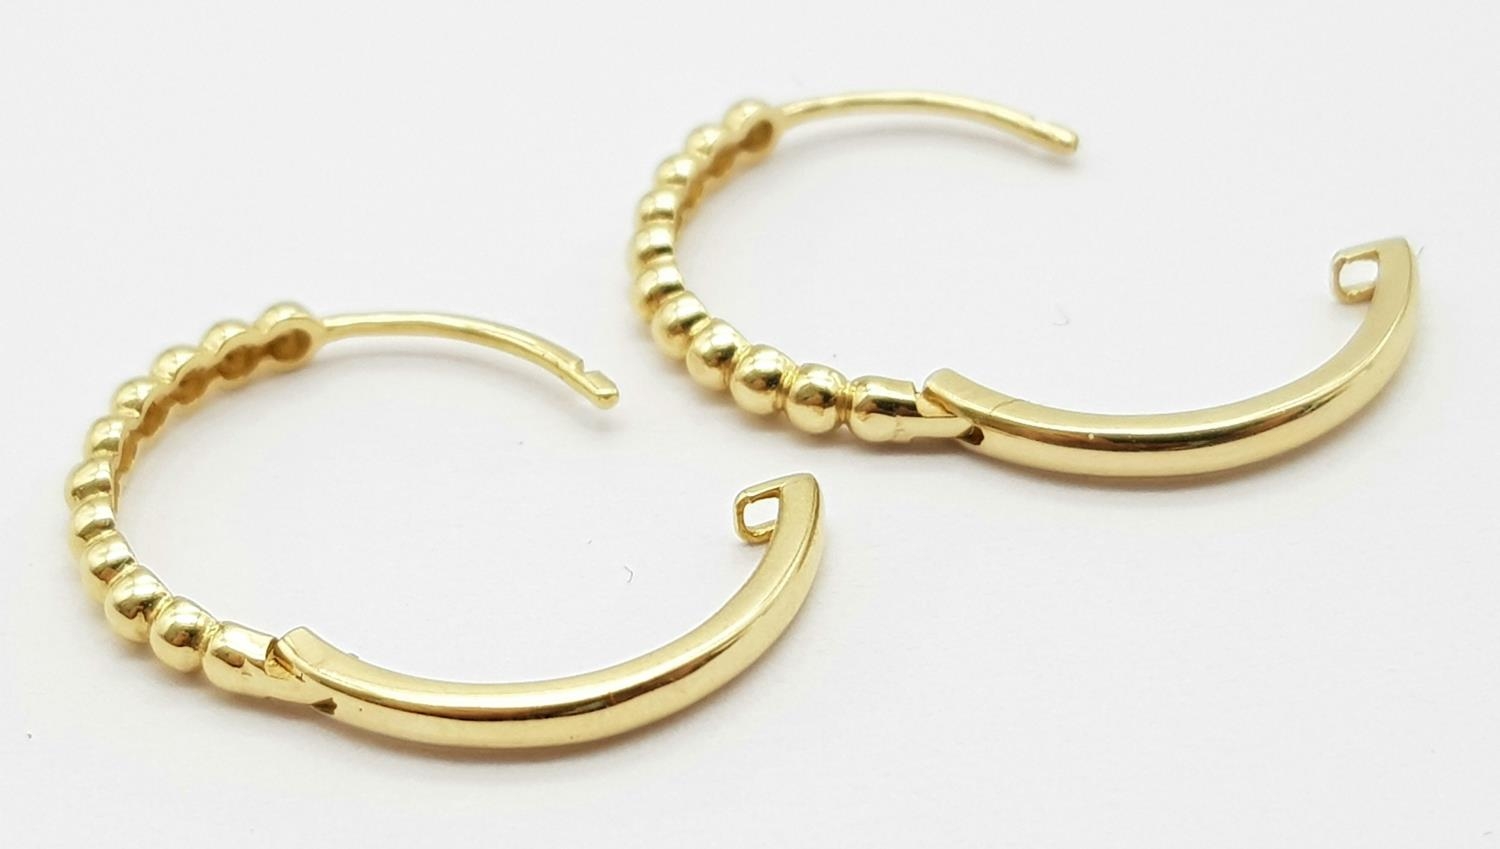 A Pair of 14k Gold Designer Massika Earrings. 1.8g total weight. - Image 3 of 4